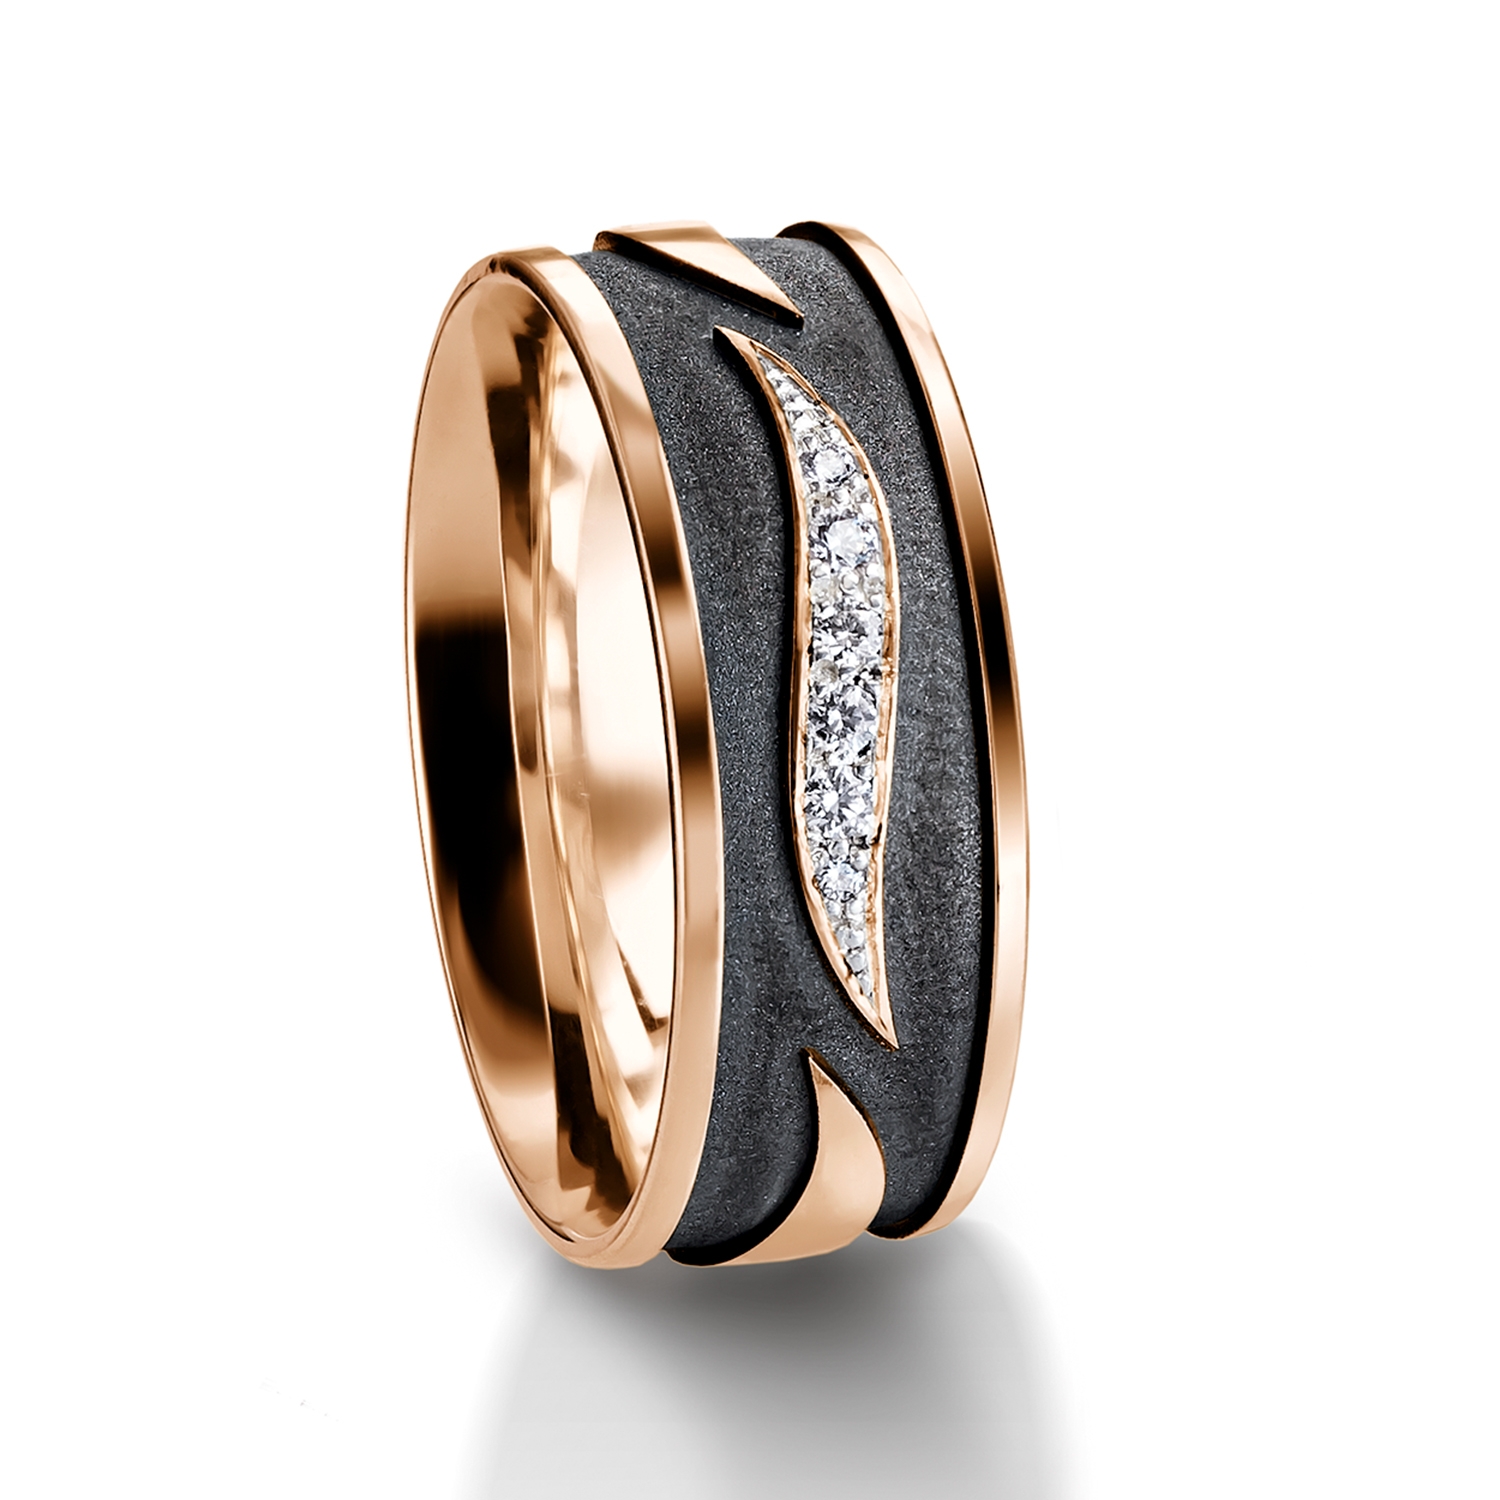 Diamond rings in gold, platinum with diamonds Furrer Jacot